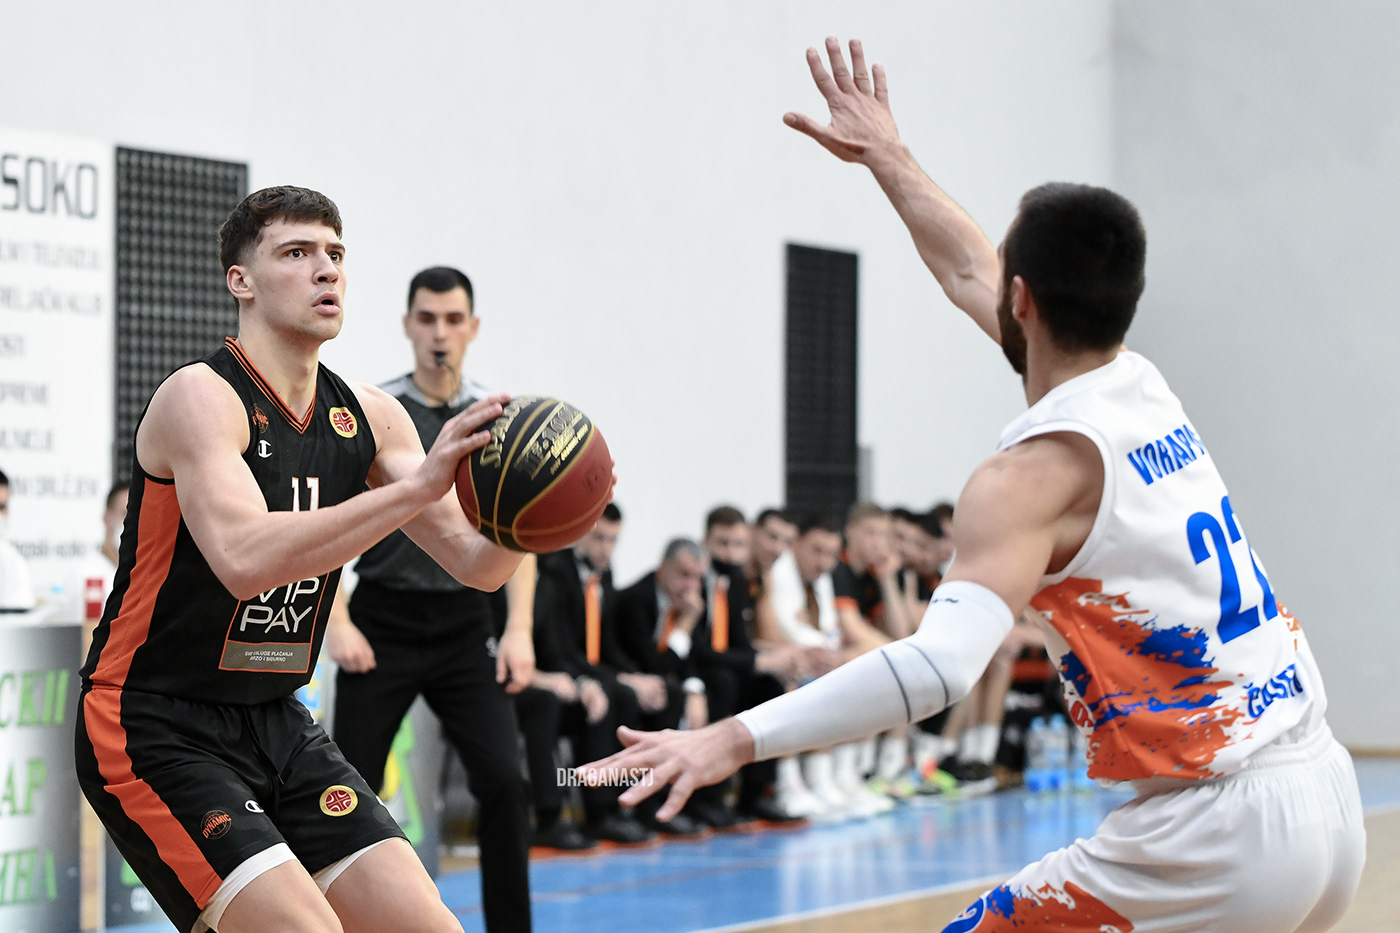 action basketball Photography  Serbia sport